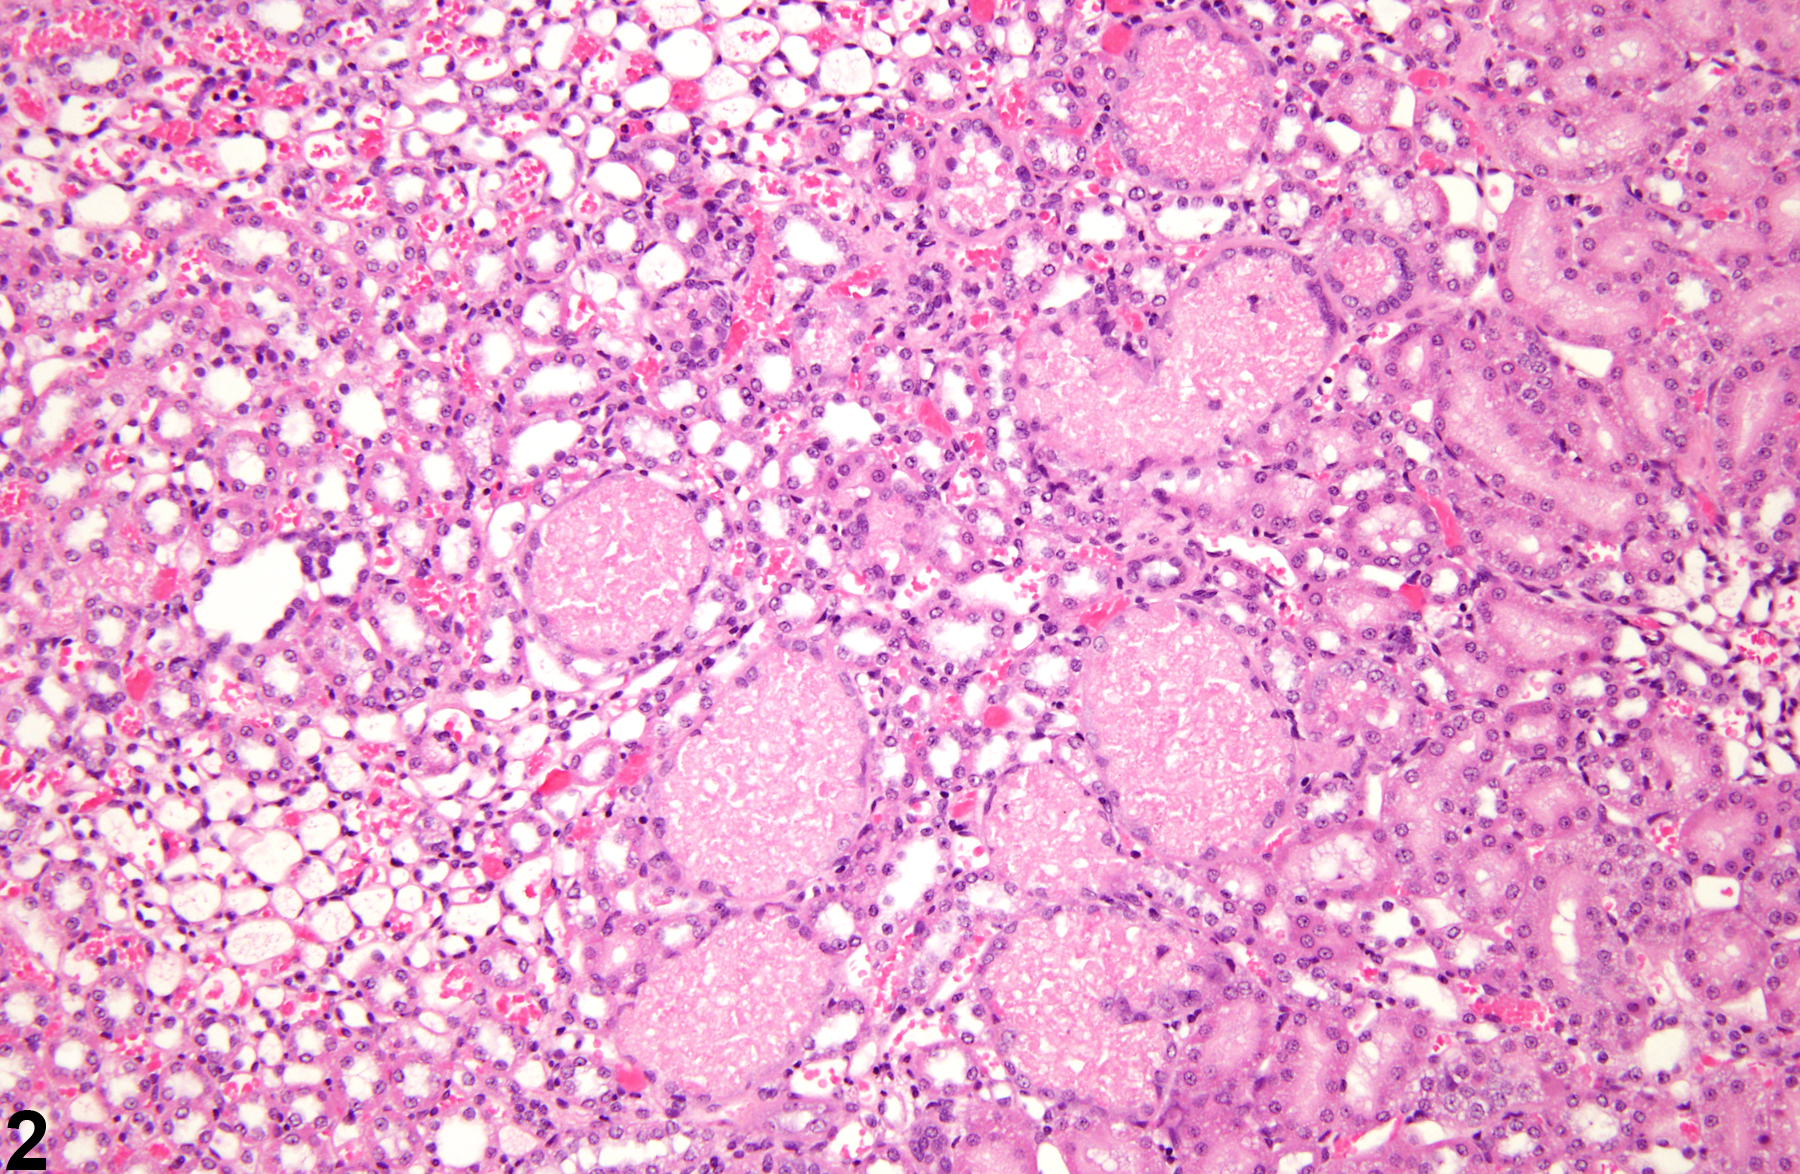 Image of renal tubule cast in the kidney from a male F344/N rat in a subchronic study